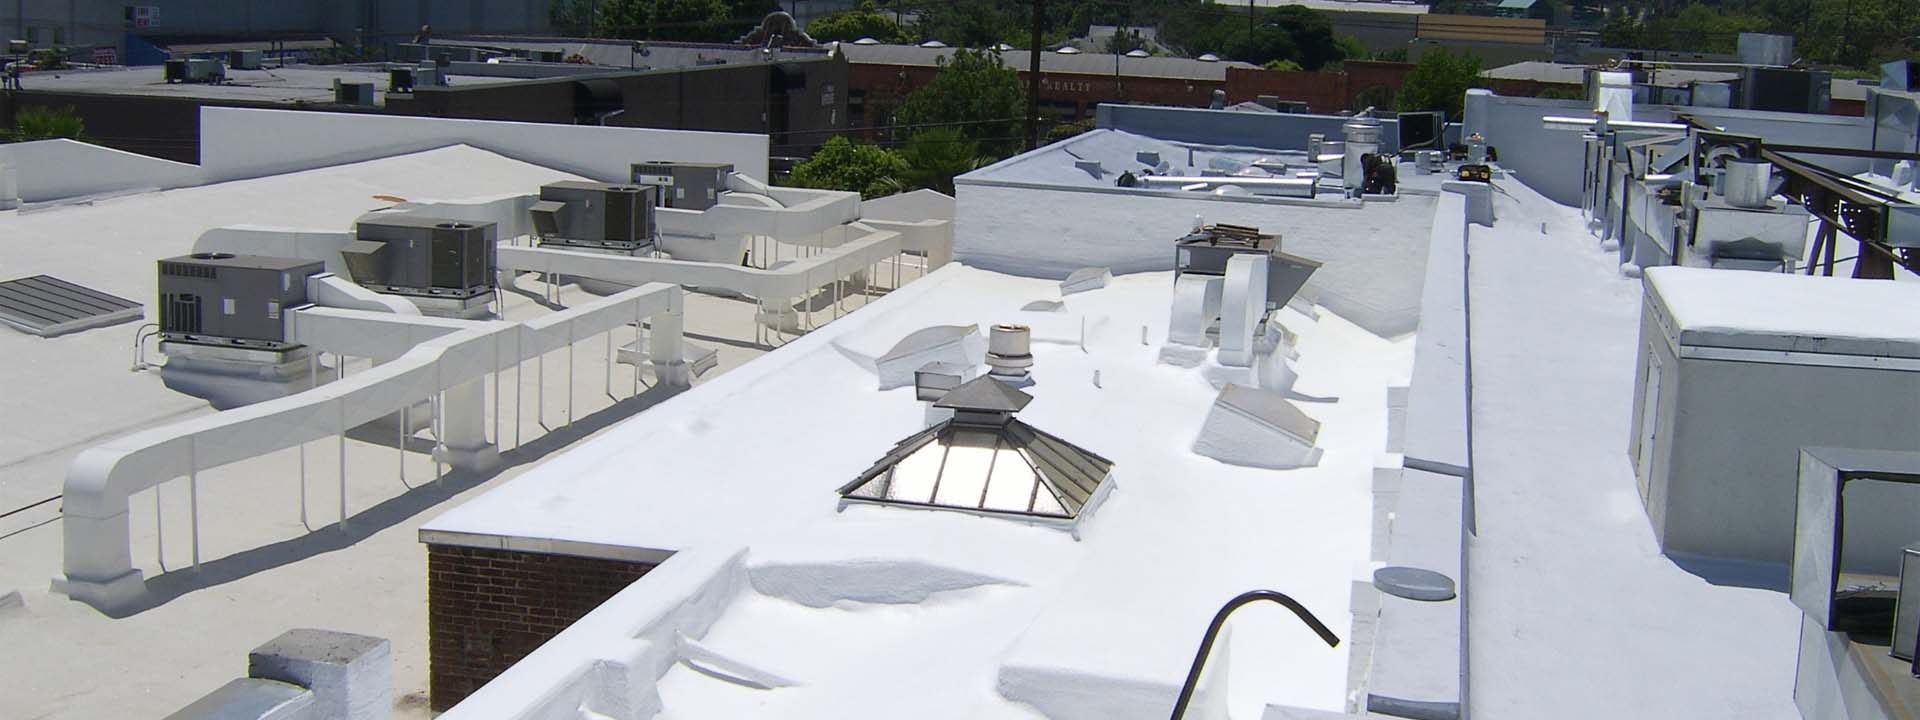 Commercial Roofing Systems - Polyurethane Foam Roofing